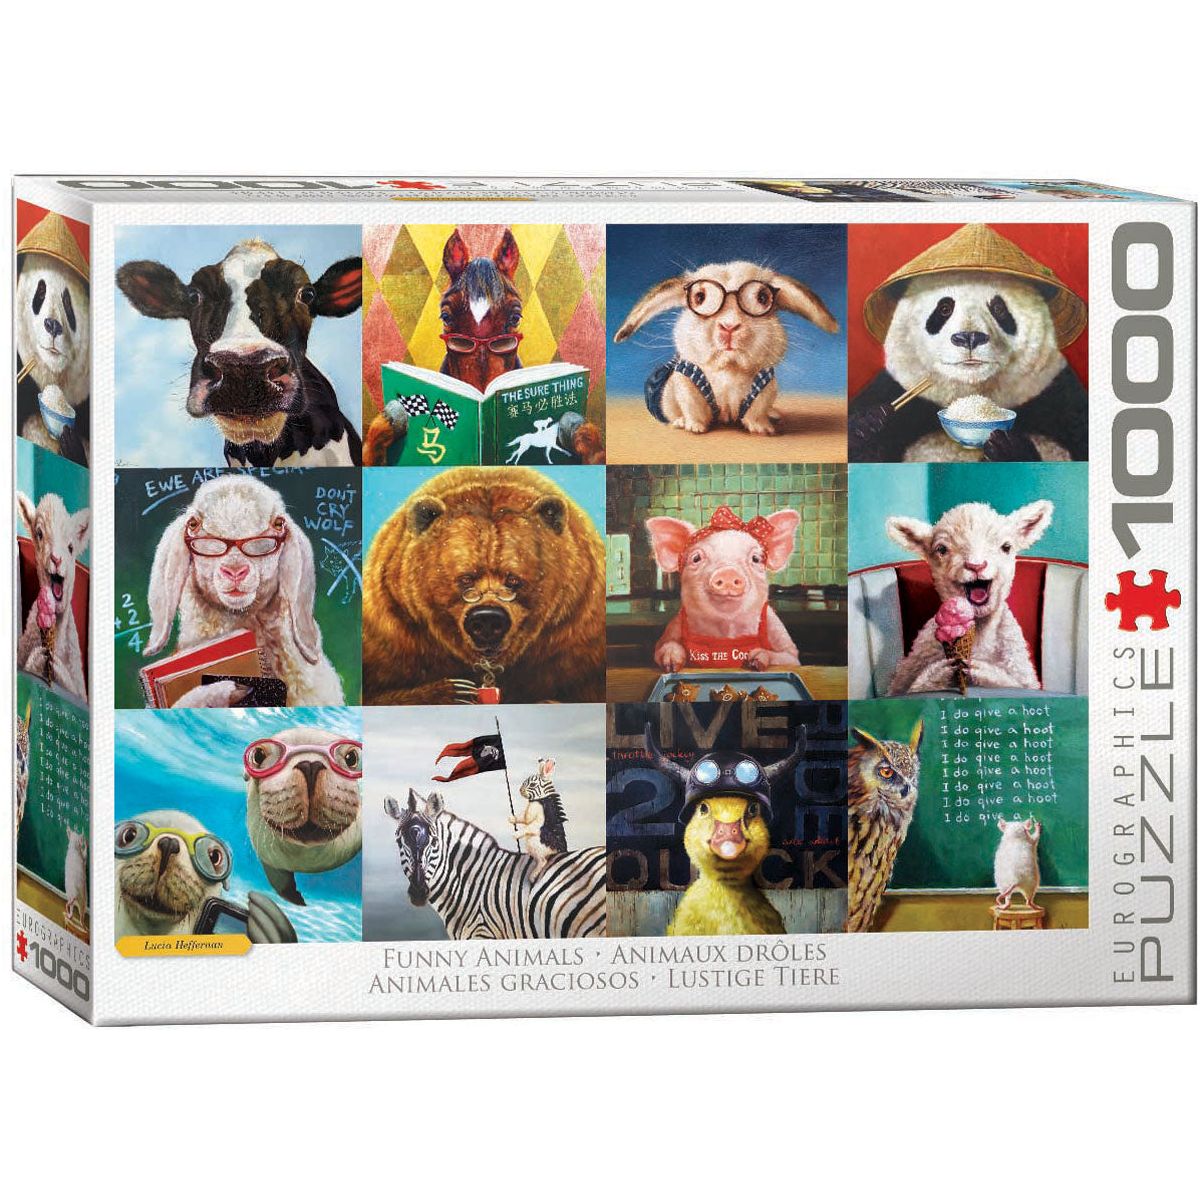 Funny Animals by L. Heffernan 1000PC Puzzle Eurographics - Zinnias Gift Boutique